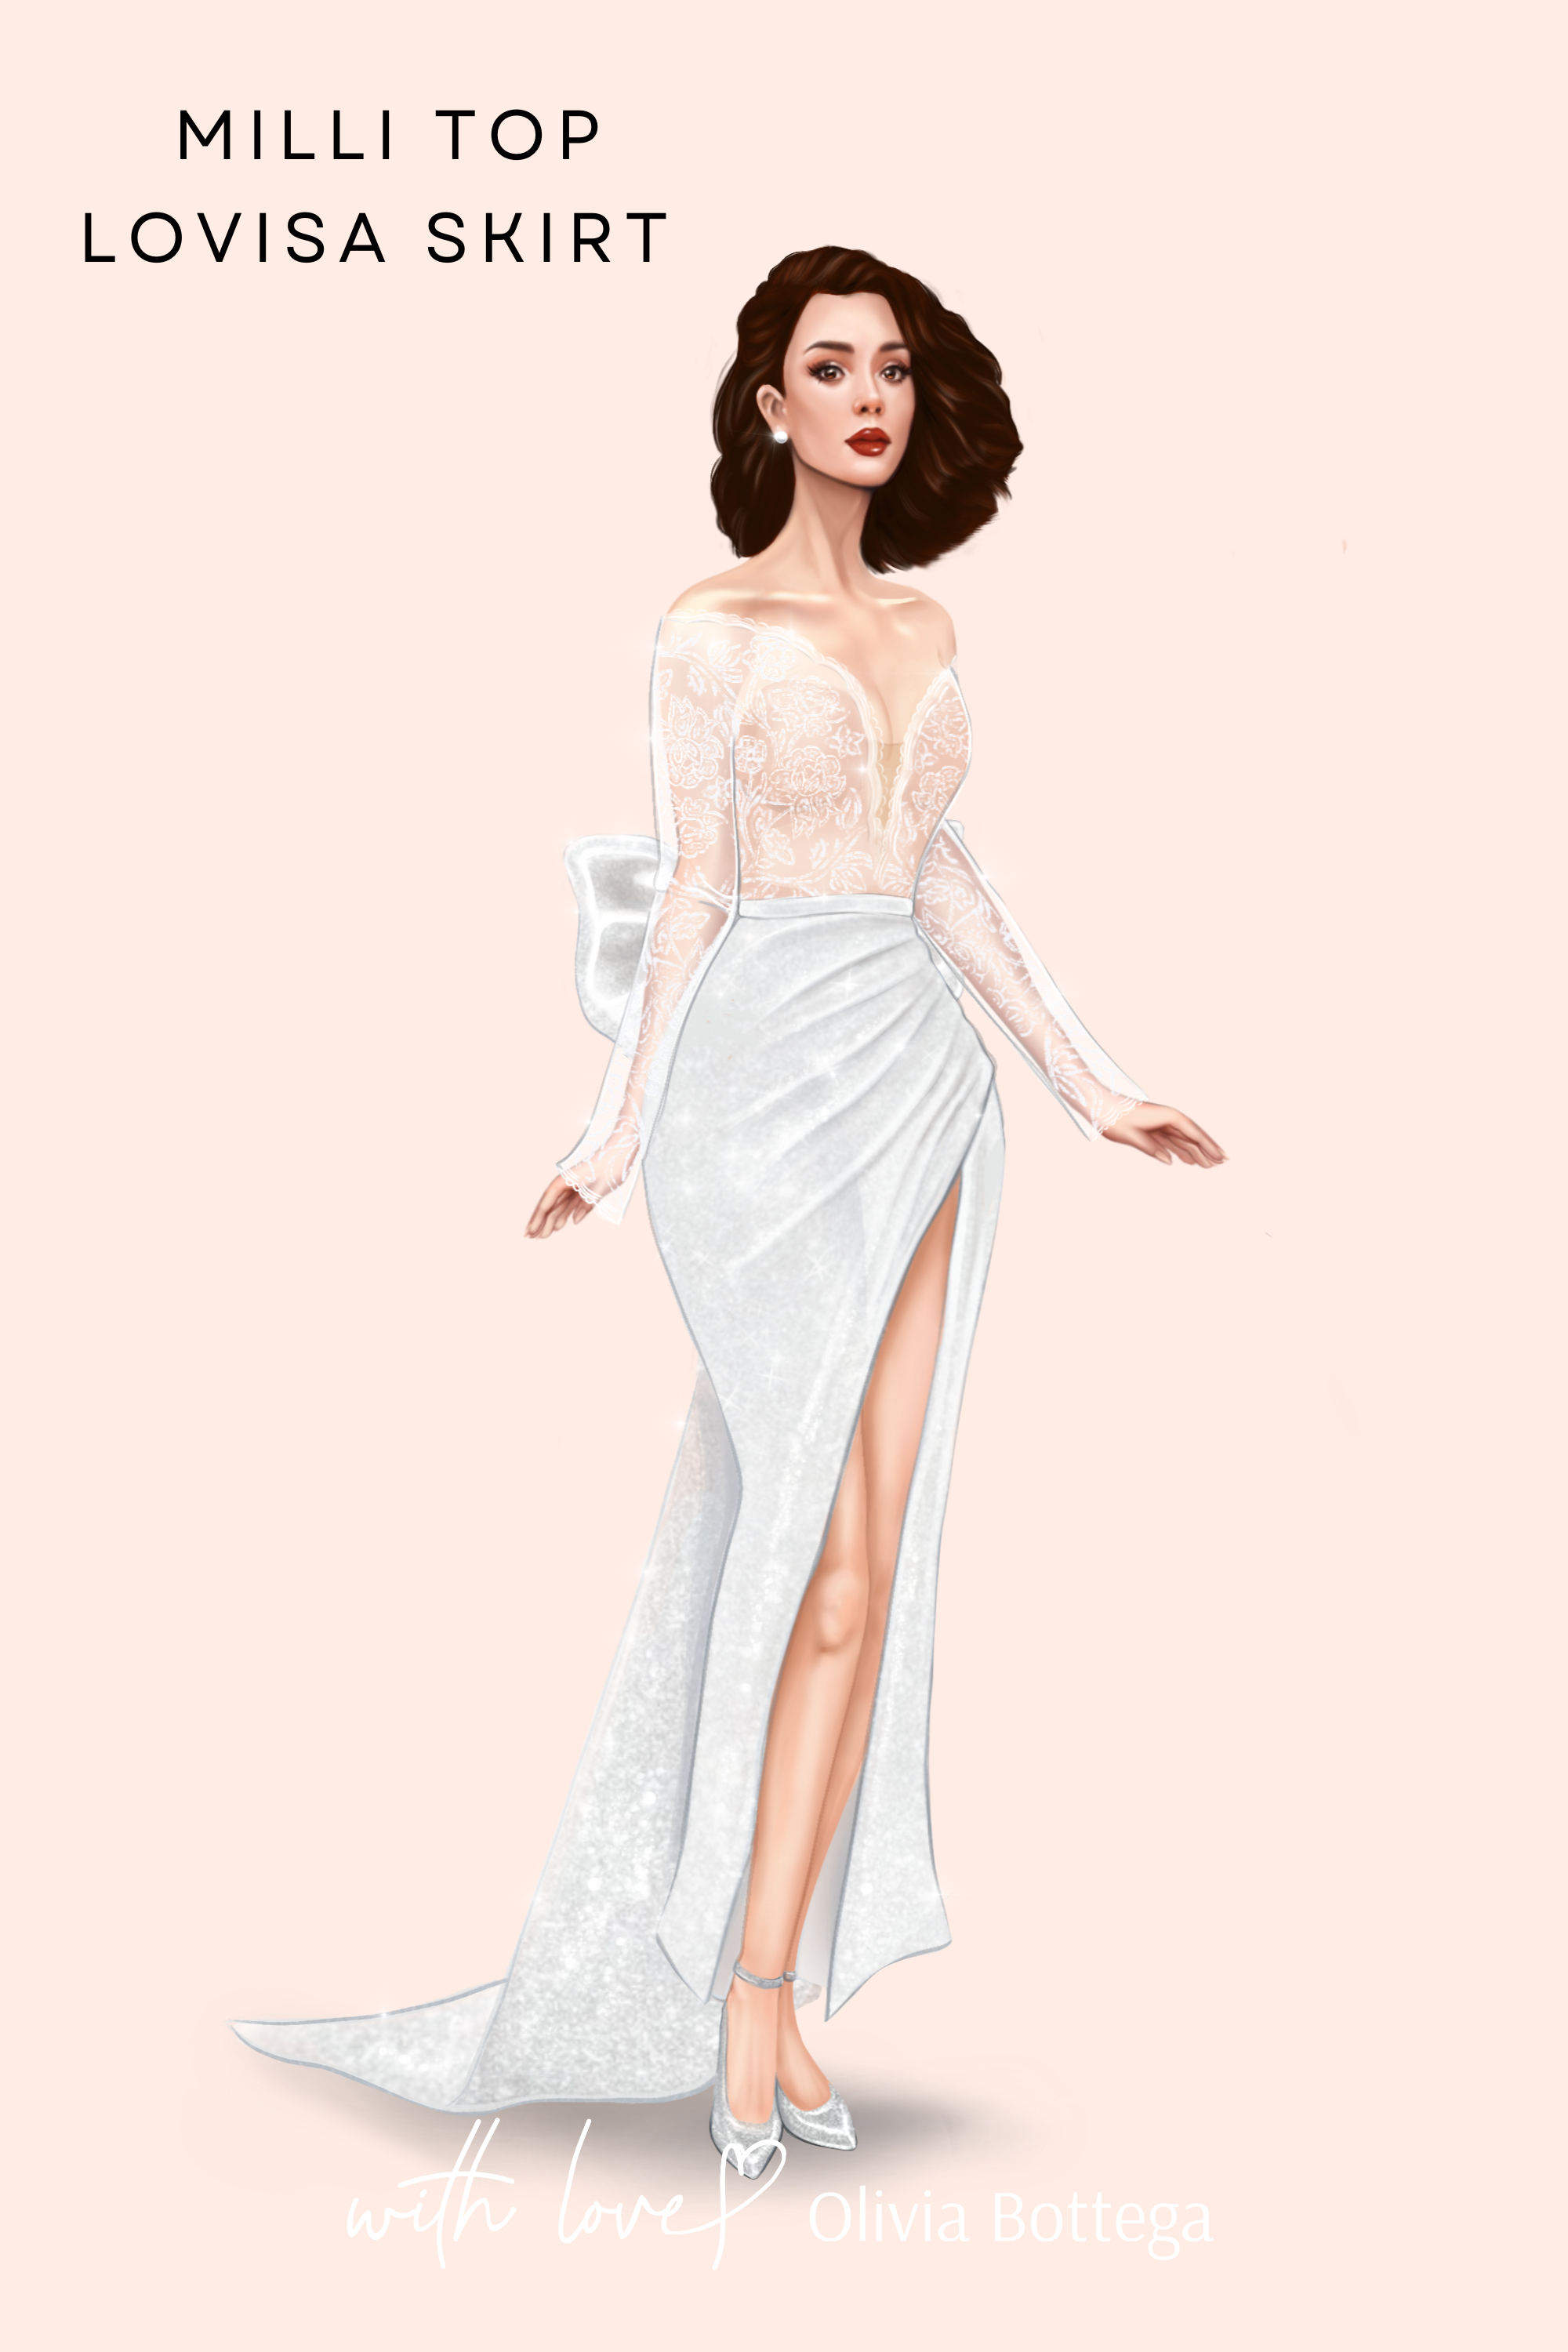 Evening gown | Fashion illustration sketches dresses, Dress illustration,  Fashion illustration dresses